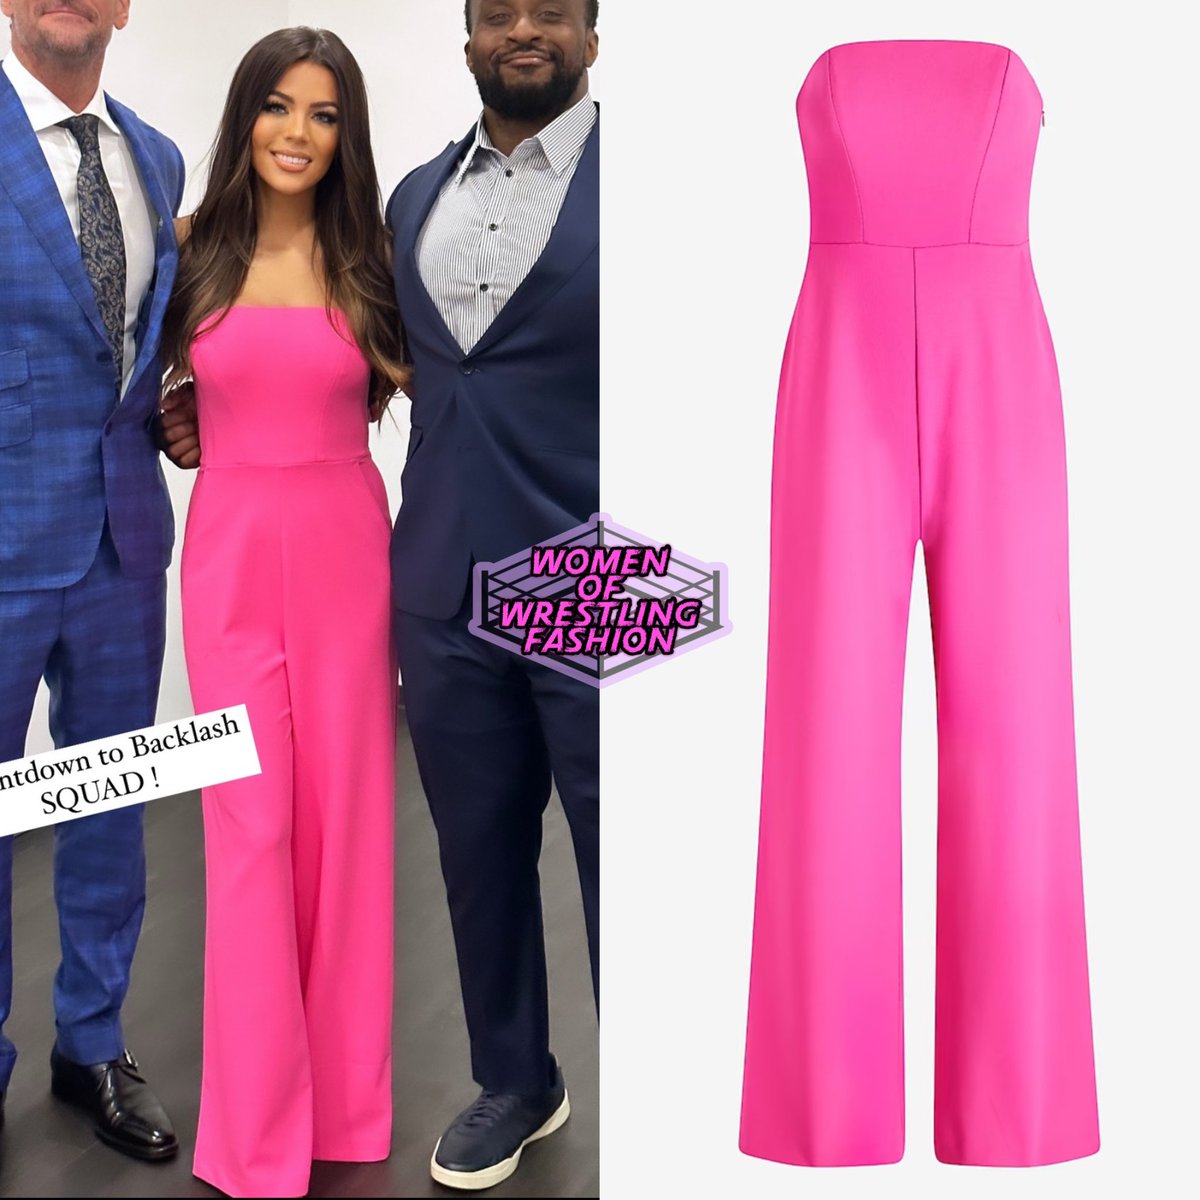 Jackie wears the Strapless Wide Leg Jumpsuit in Hot Pink from Express ($52.80 - on sale)